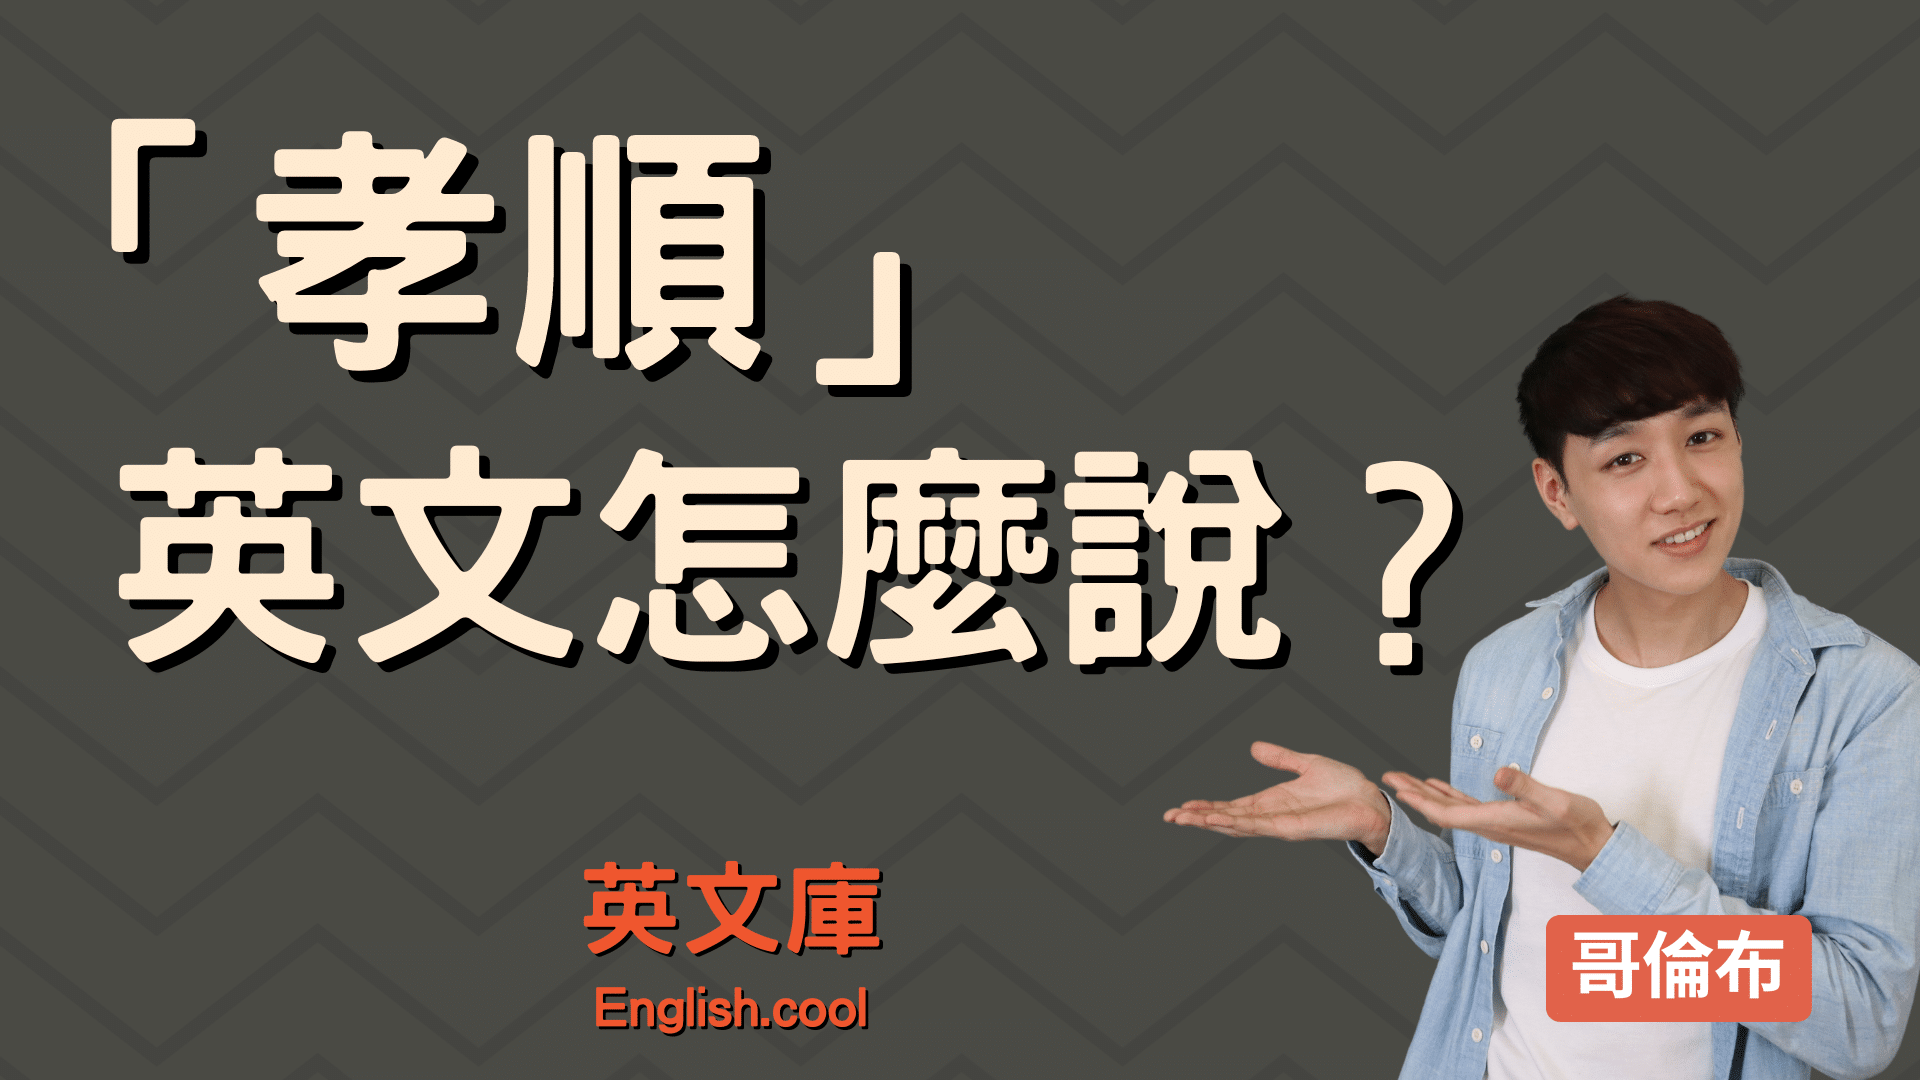 You are currently viewing 「孝順」 英文怎麼說？ 真的是 “filial piety”? 小心！